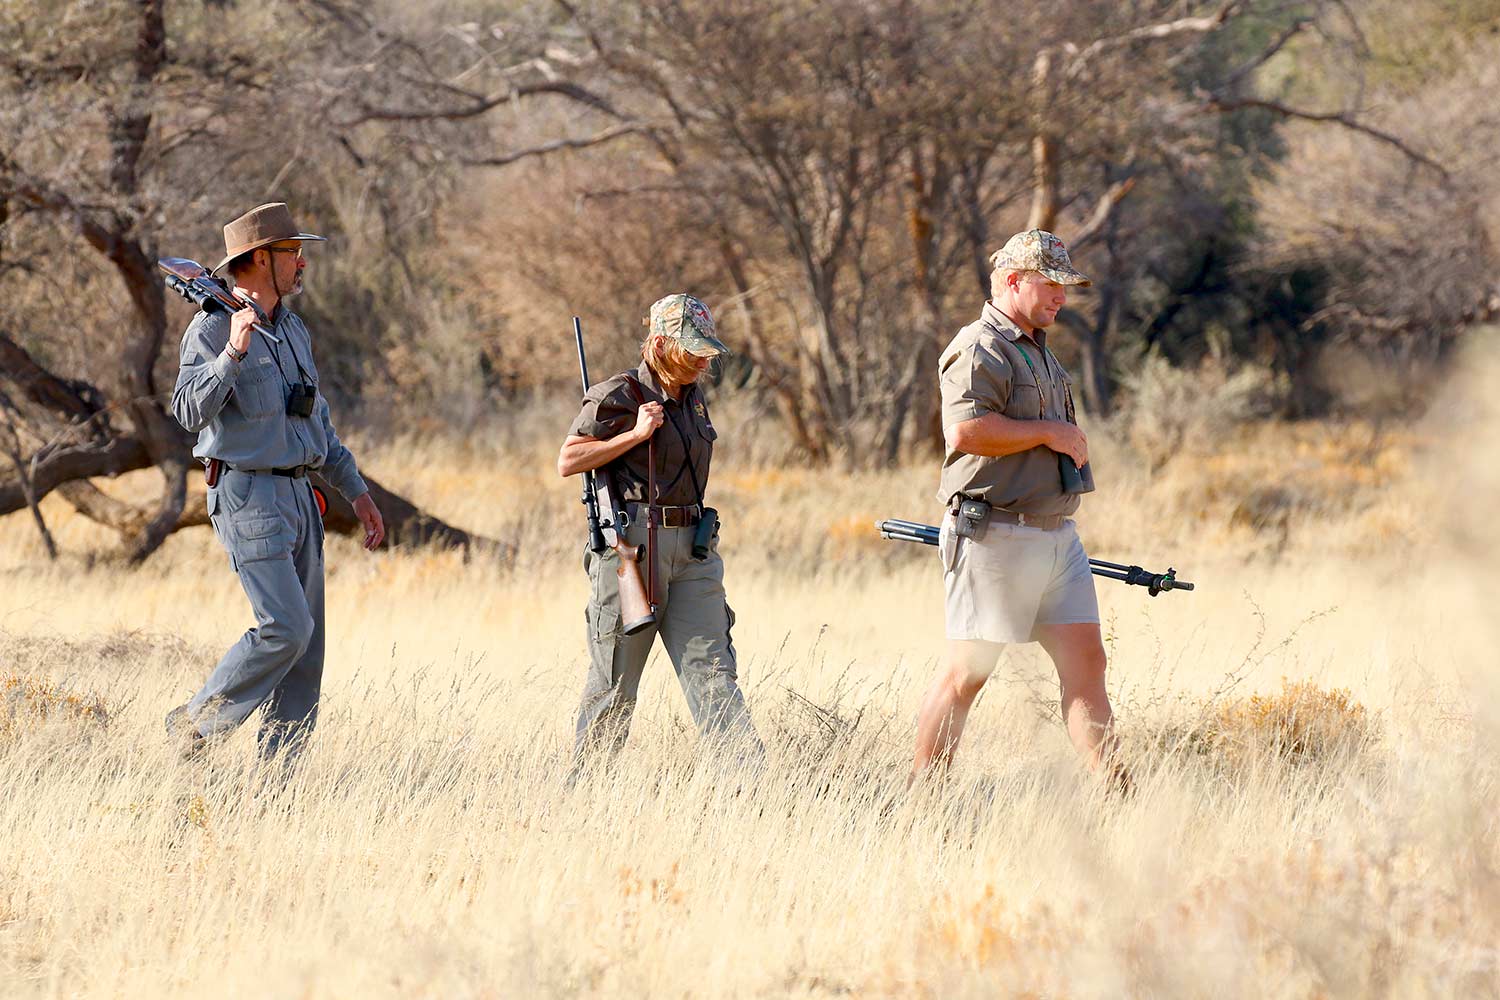 Hunters walking through the fields in Africa.